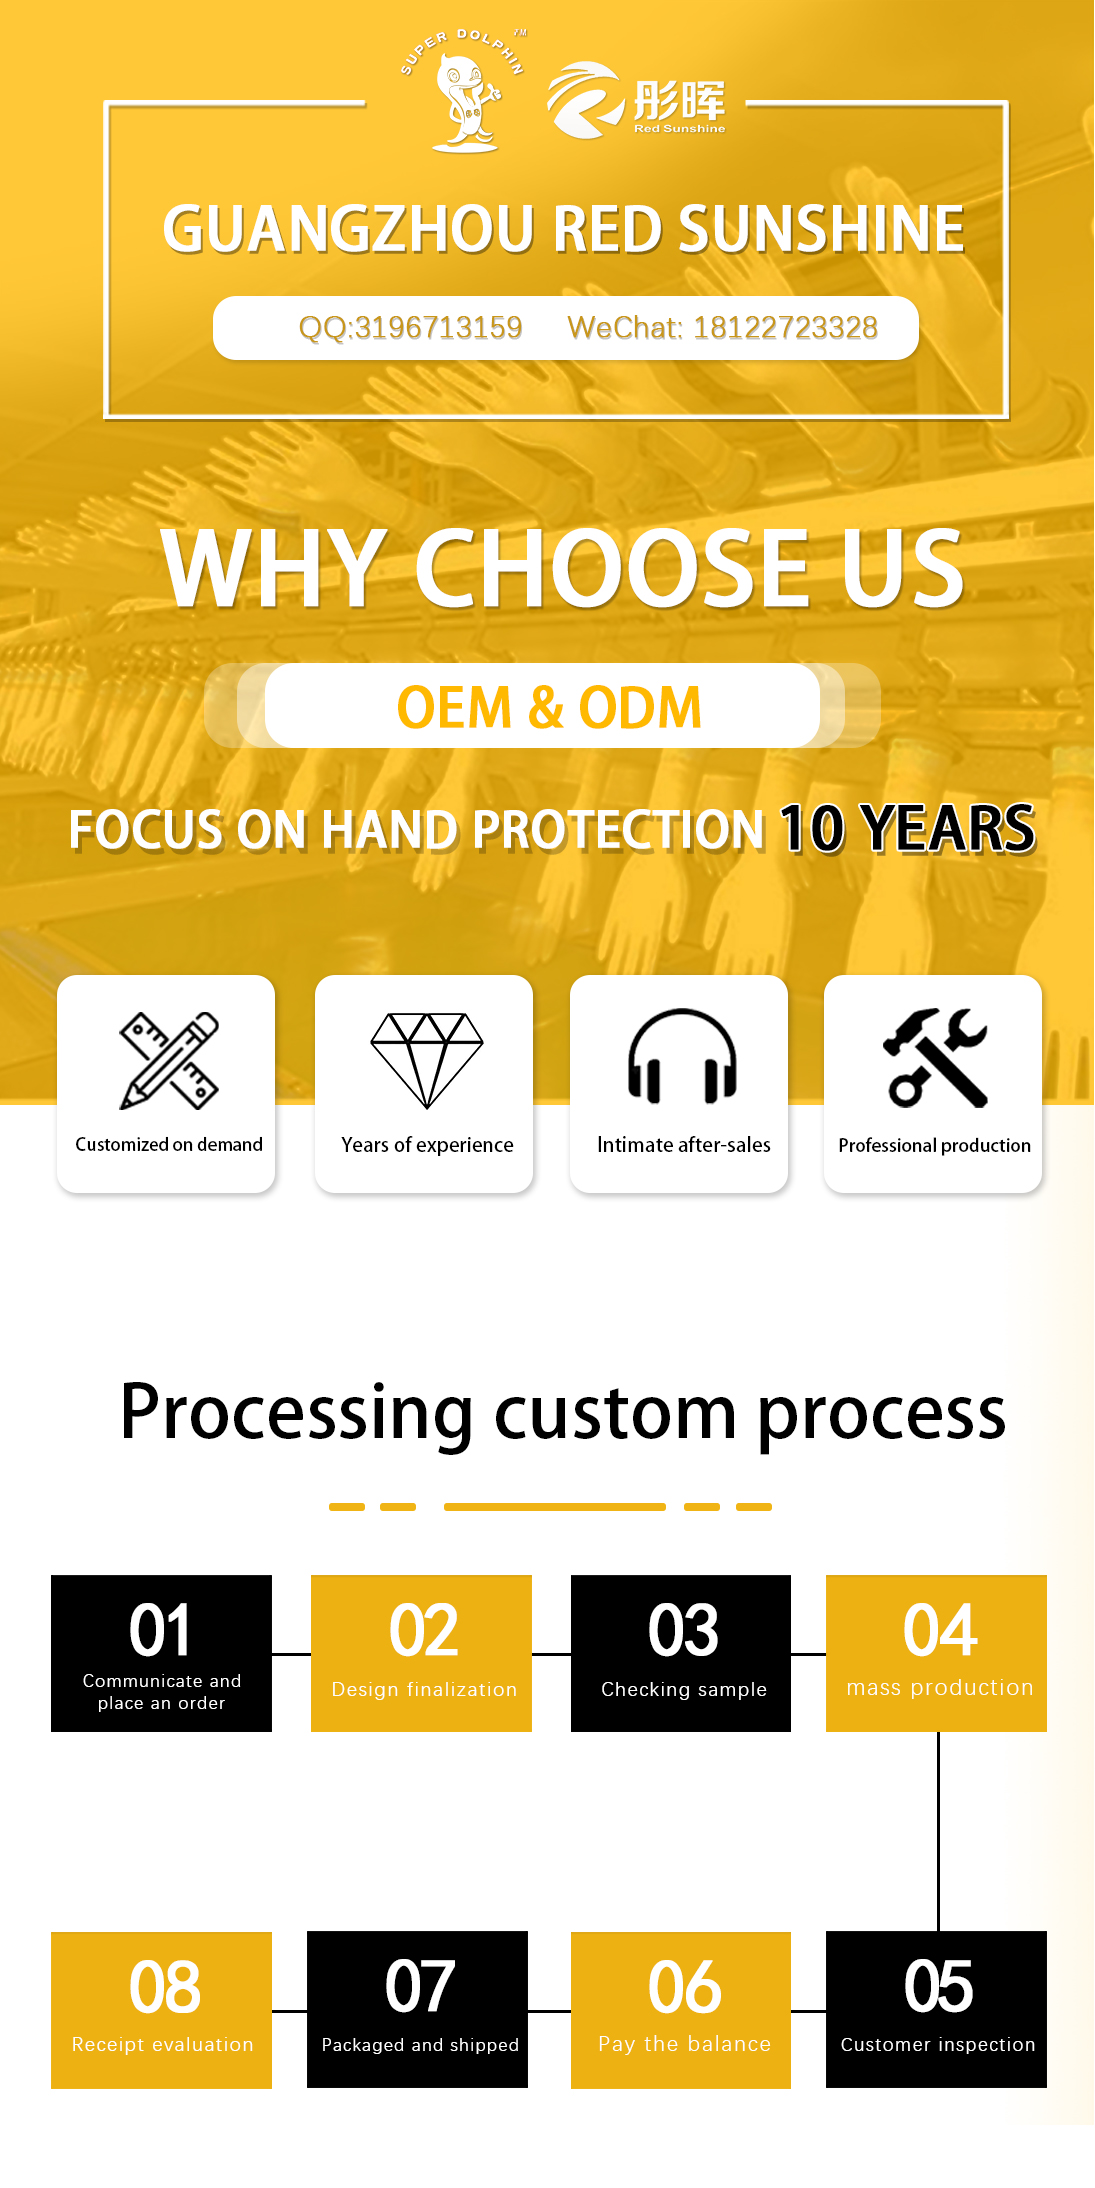 https://www.ppe-gloves.com/about-us/